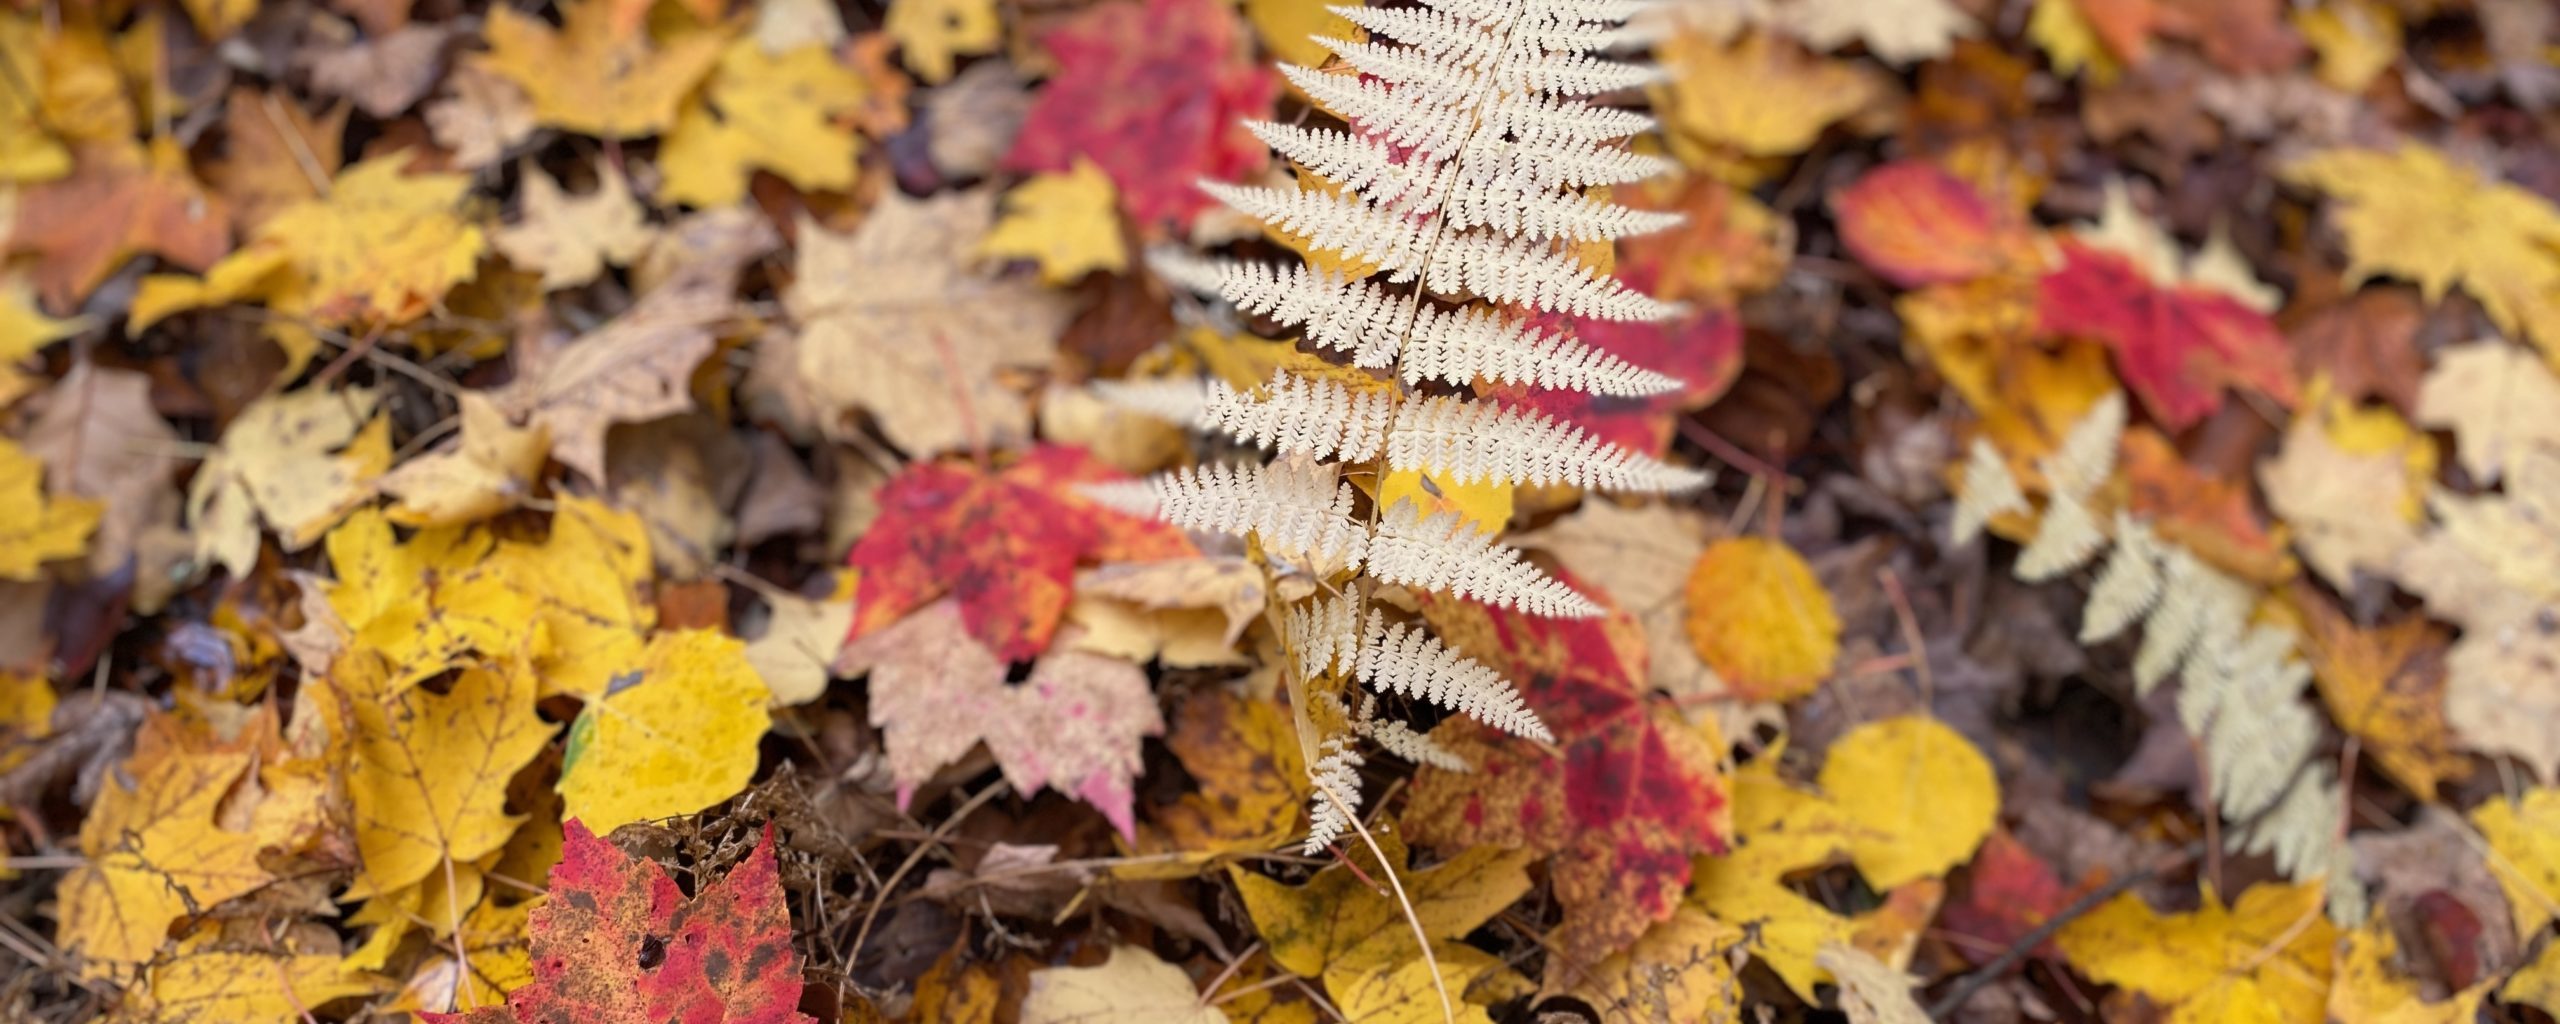 Fall leaves and a white fern